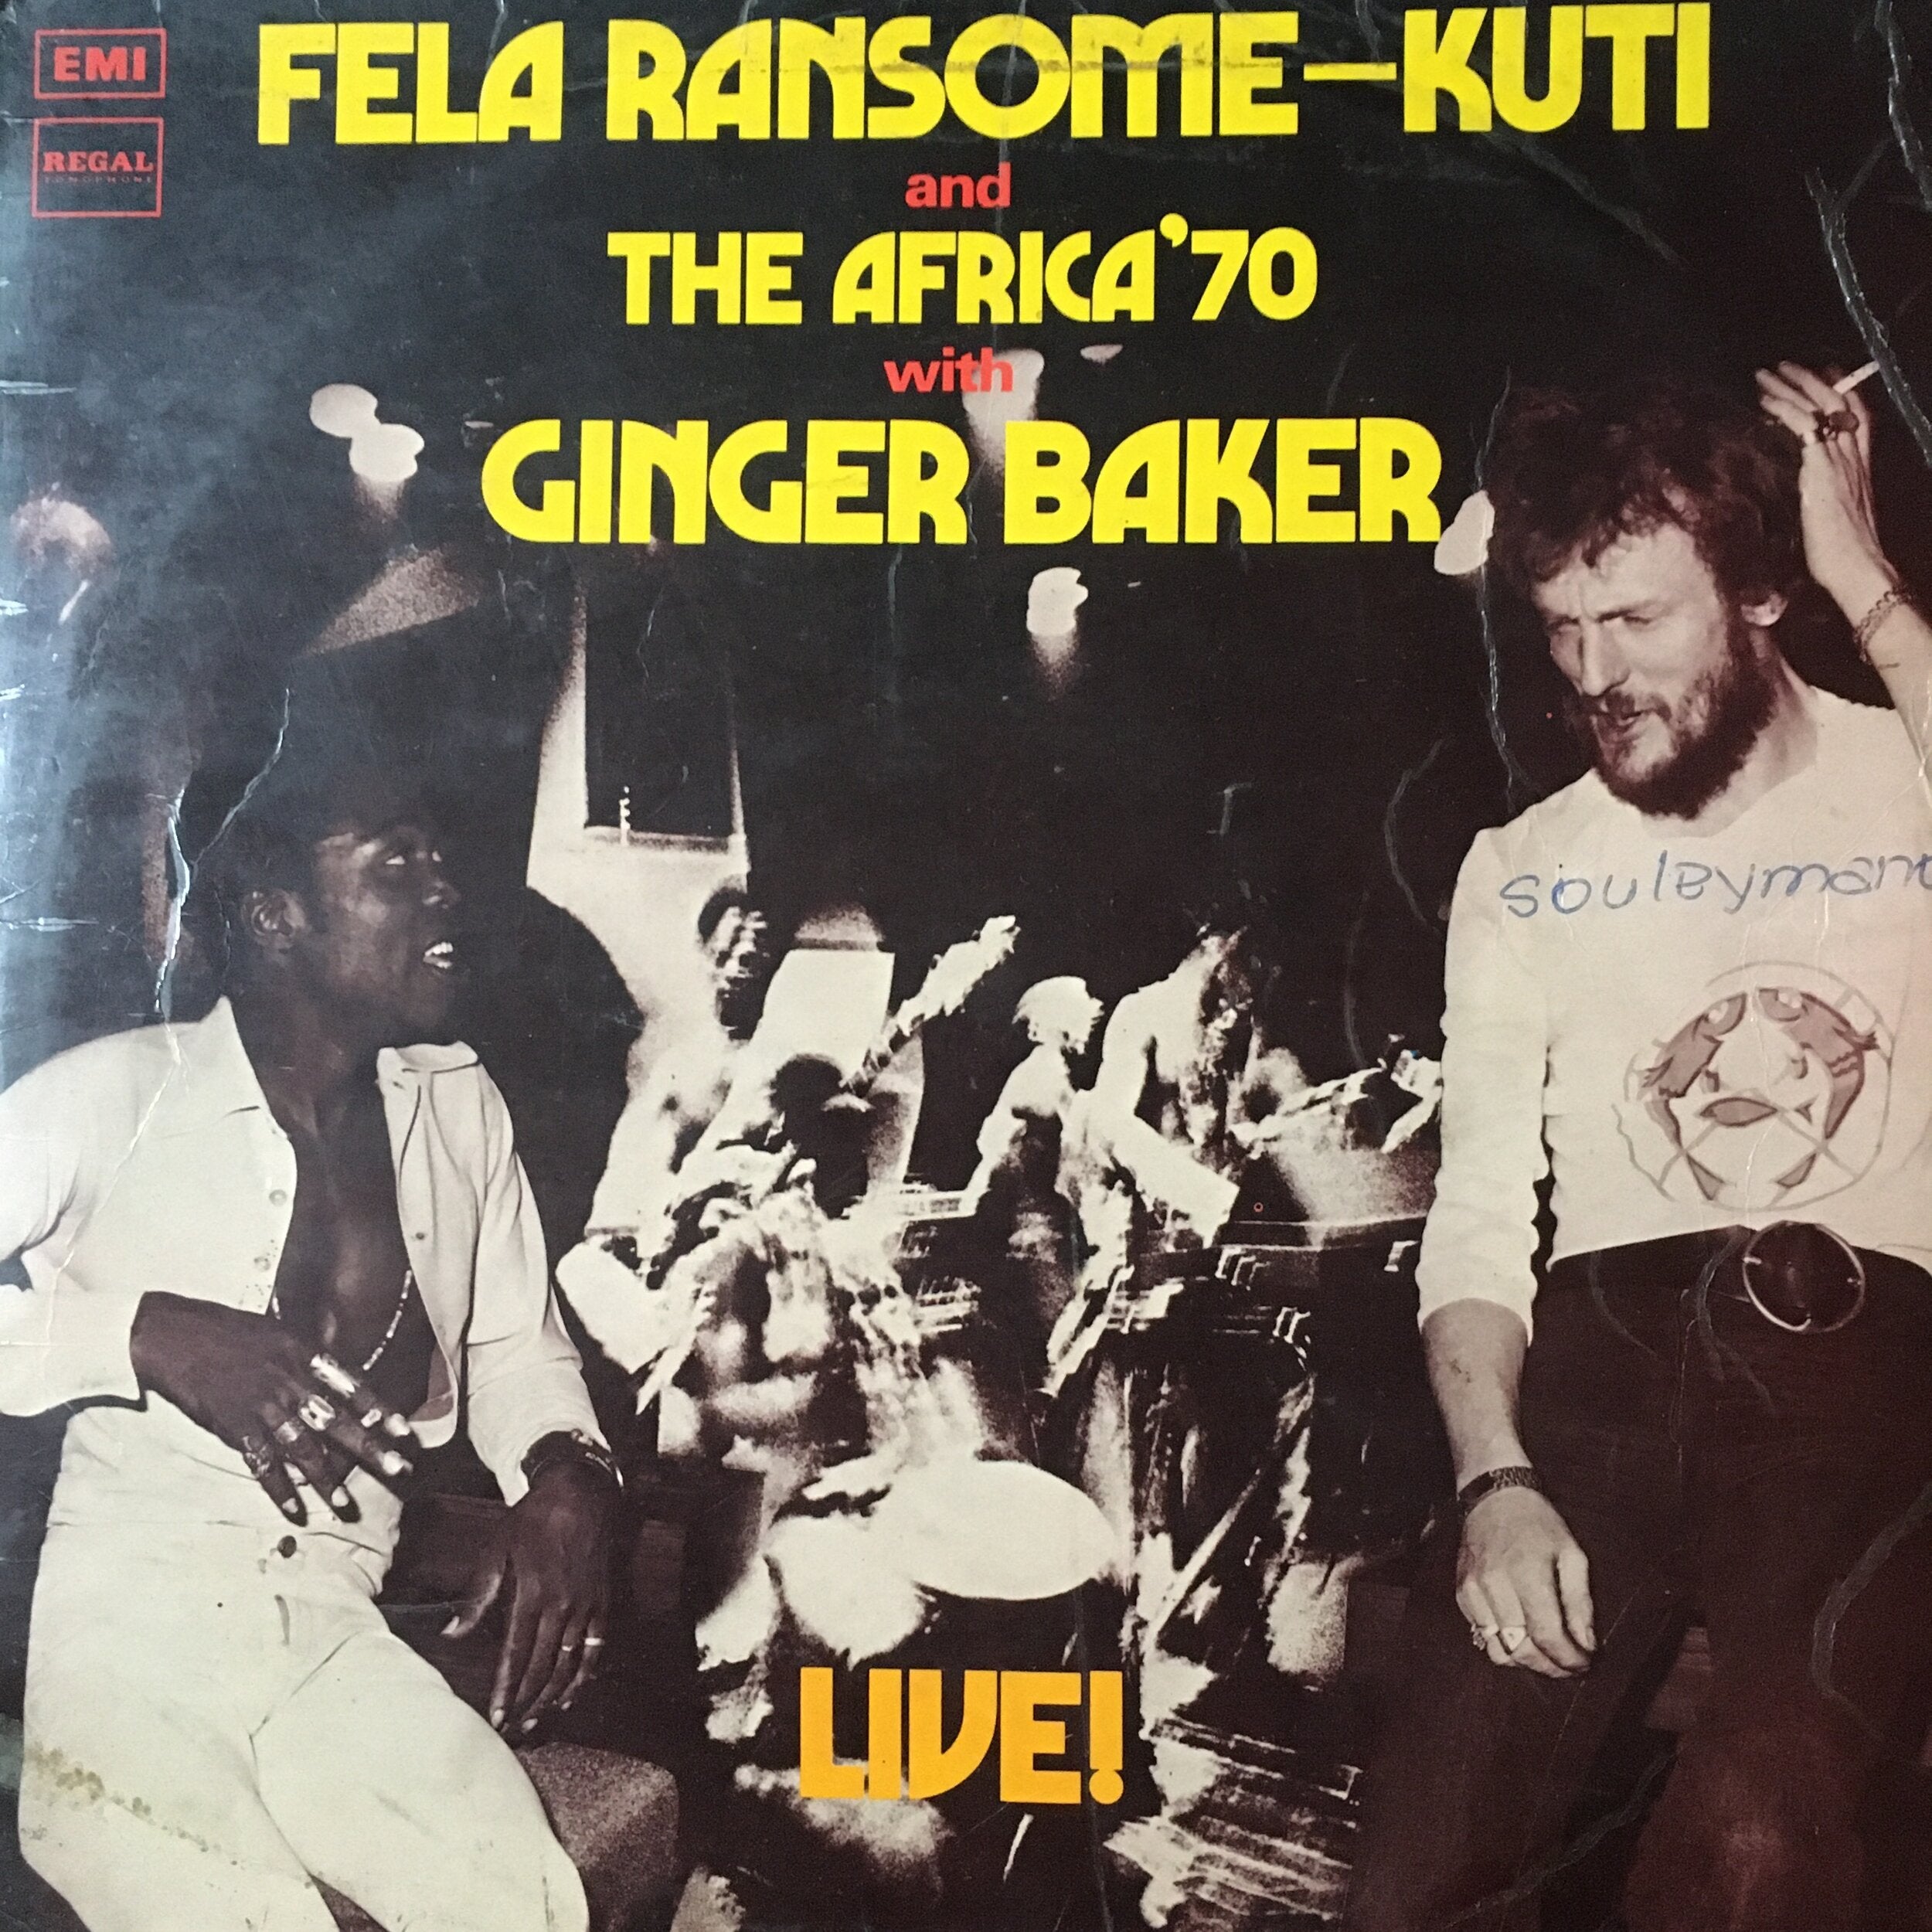 FELA RANSOME-KUTI and the AFRICA '70 with GINGER BAKER | LIVE